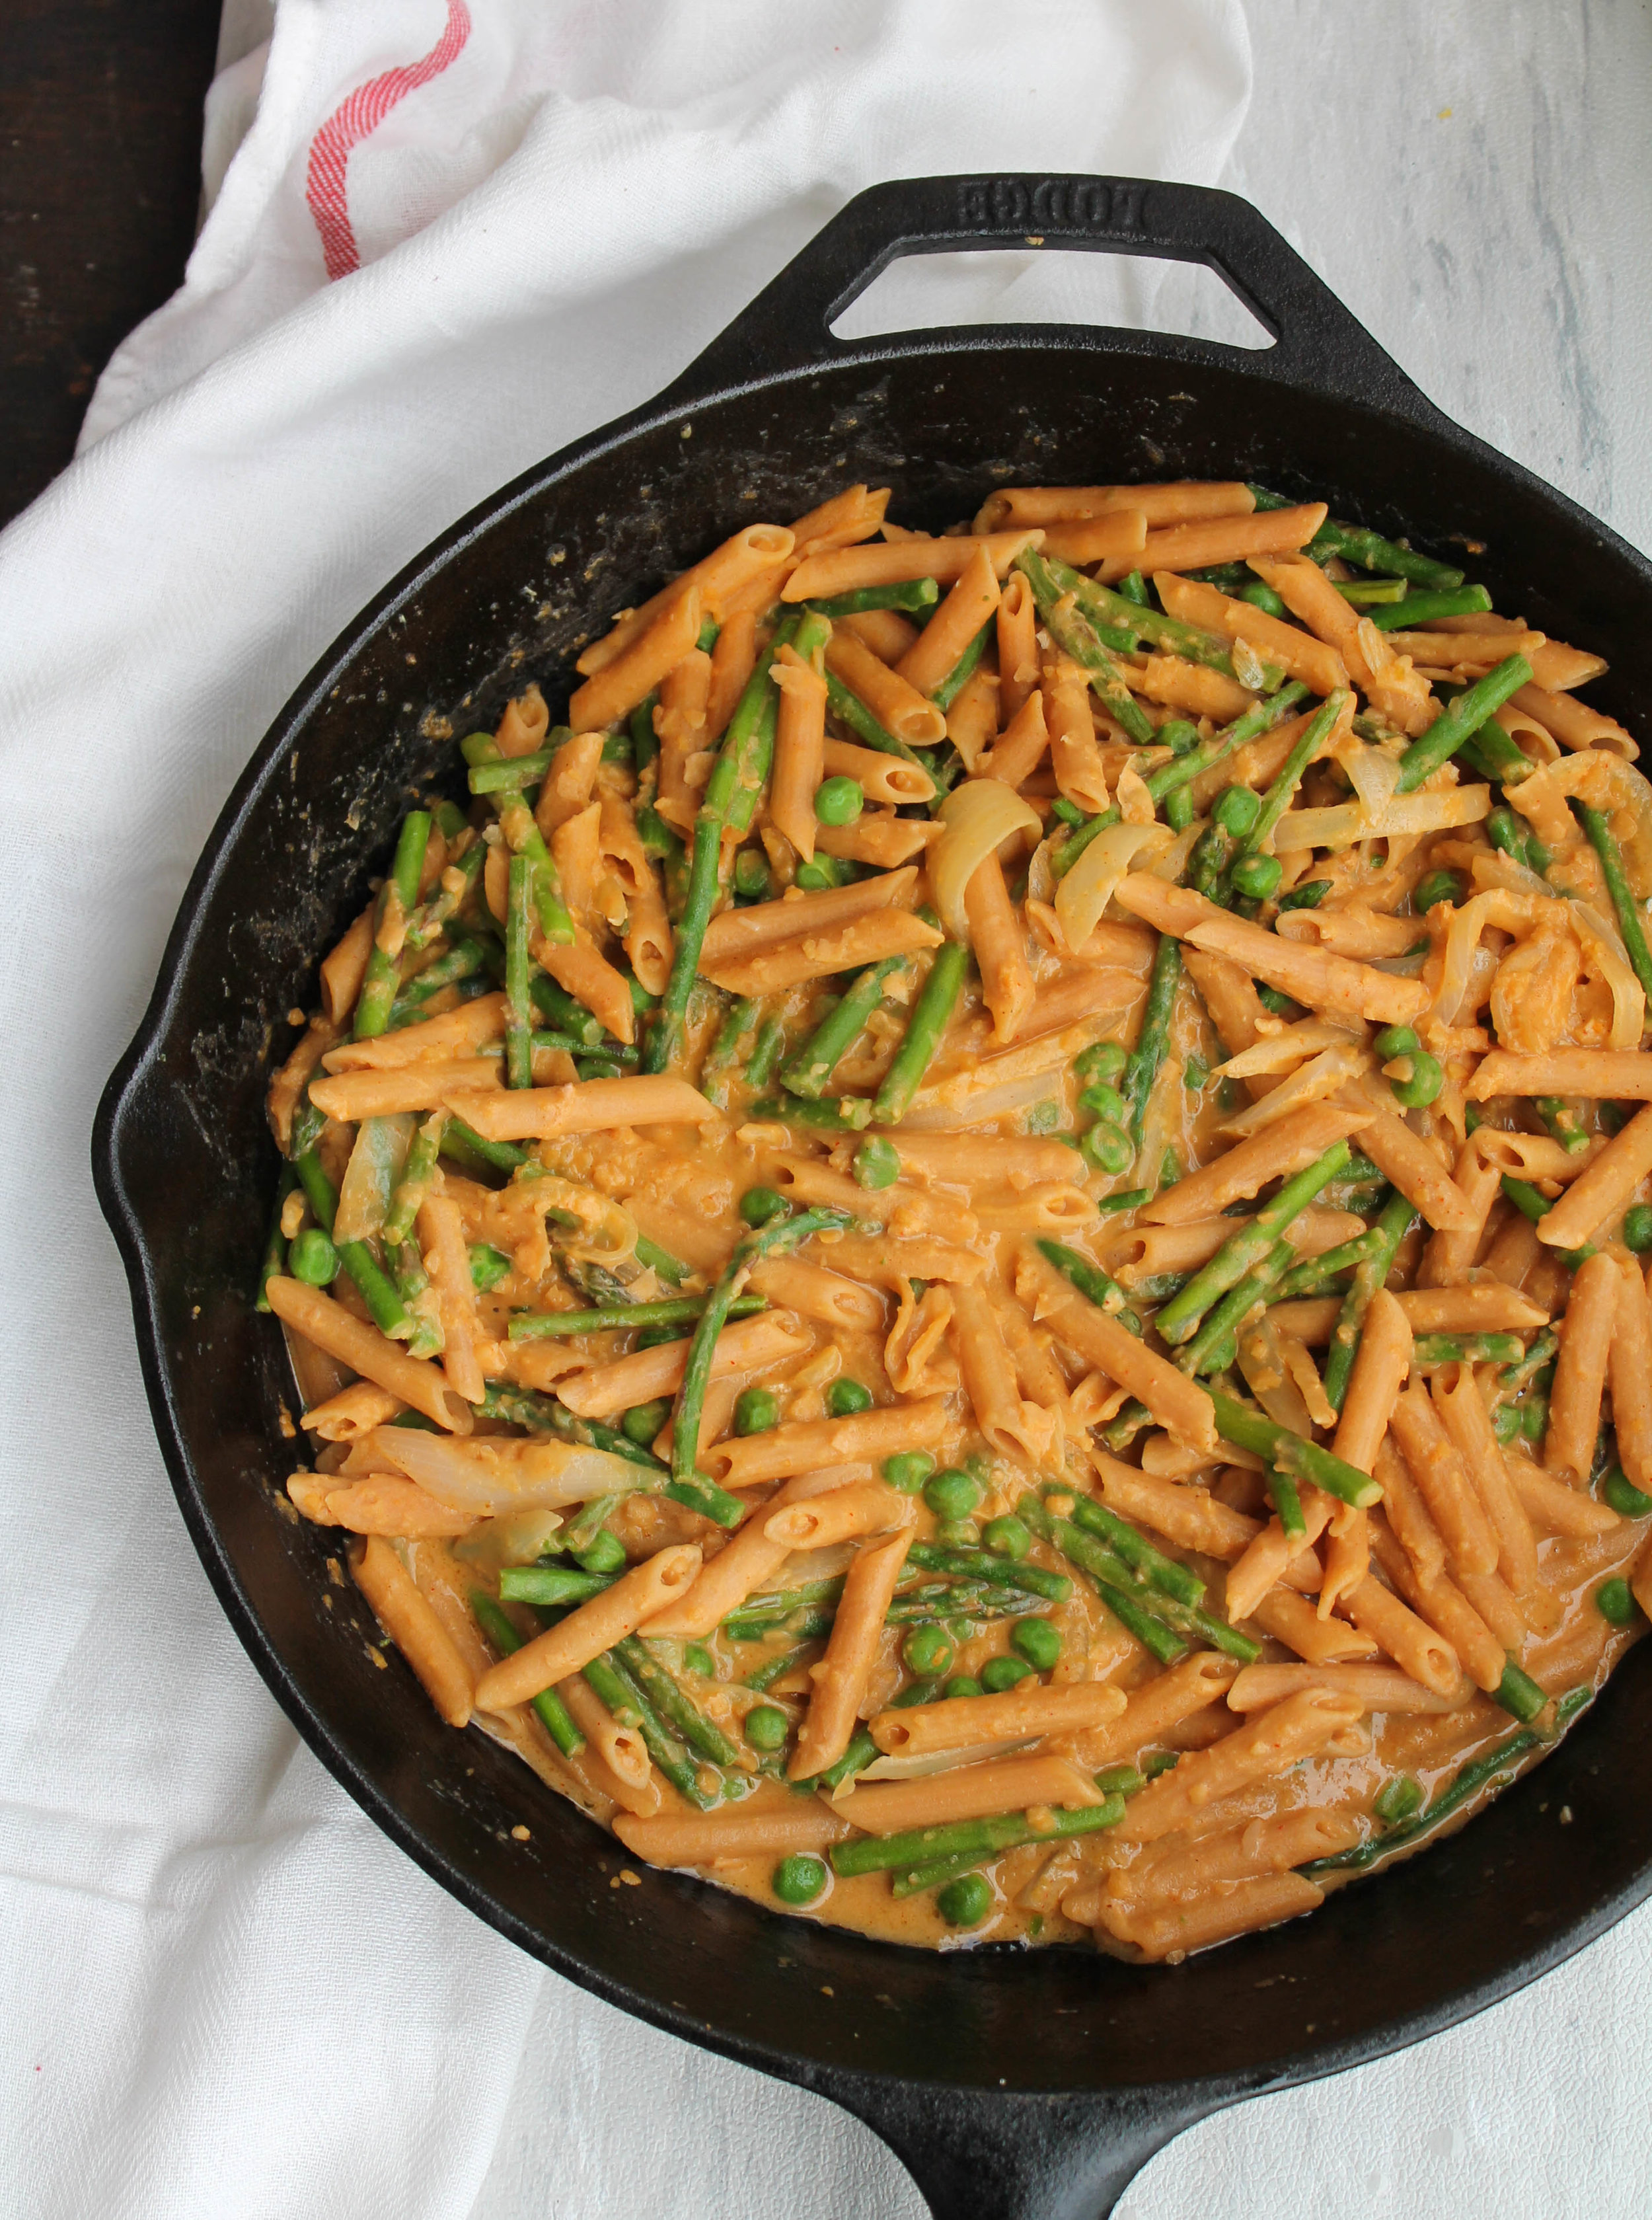 Vegan, Gluten-Free Spring Vegetable Hummus Pasta is what you need to welcome Spring! Great for a quick weeknight dinner and flexible with hummus and vegetables of your choice.